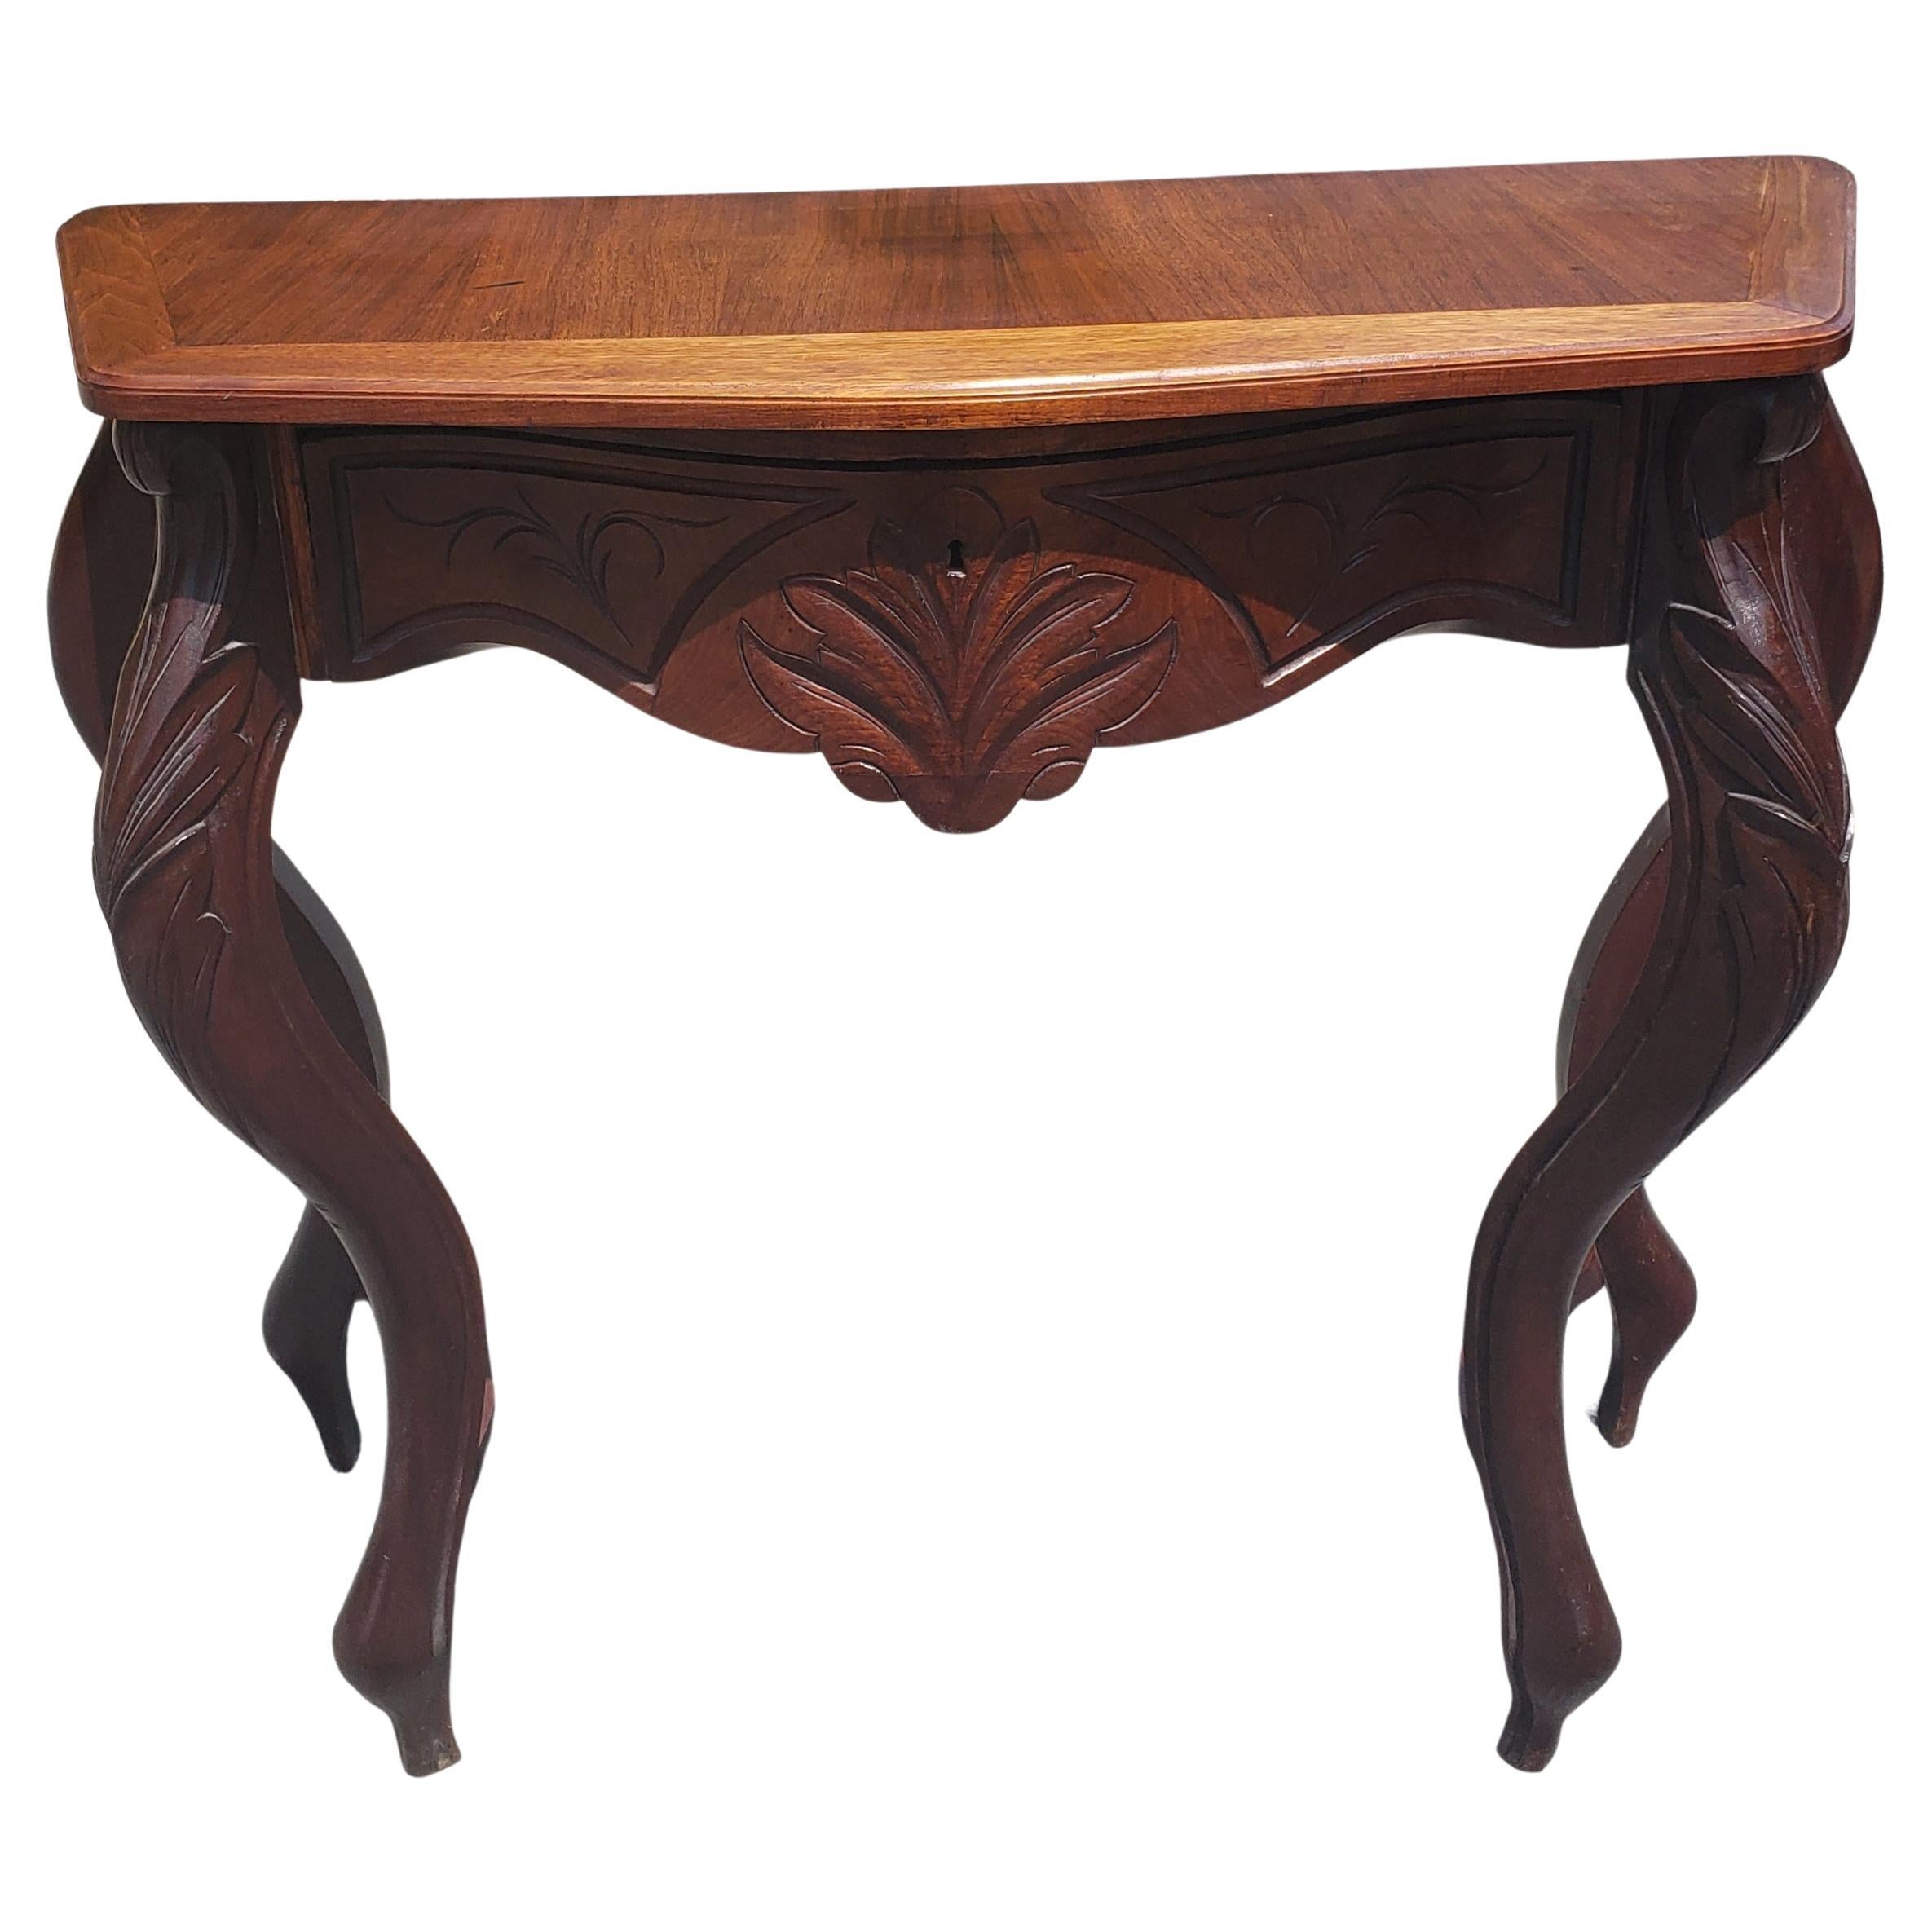 Victorian rococo style one drawer cuban mahogany console table, Circa 1890s in very good condition and measuring 37.5